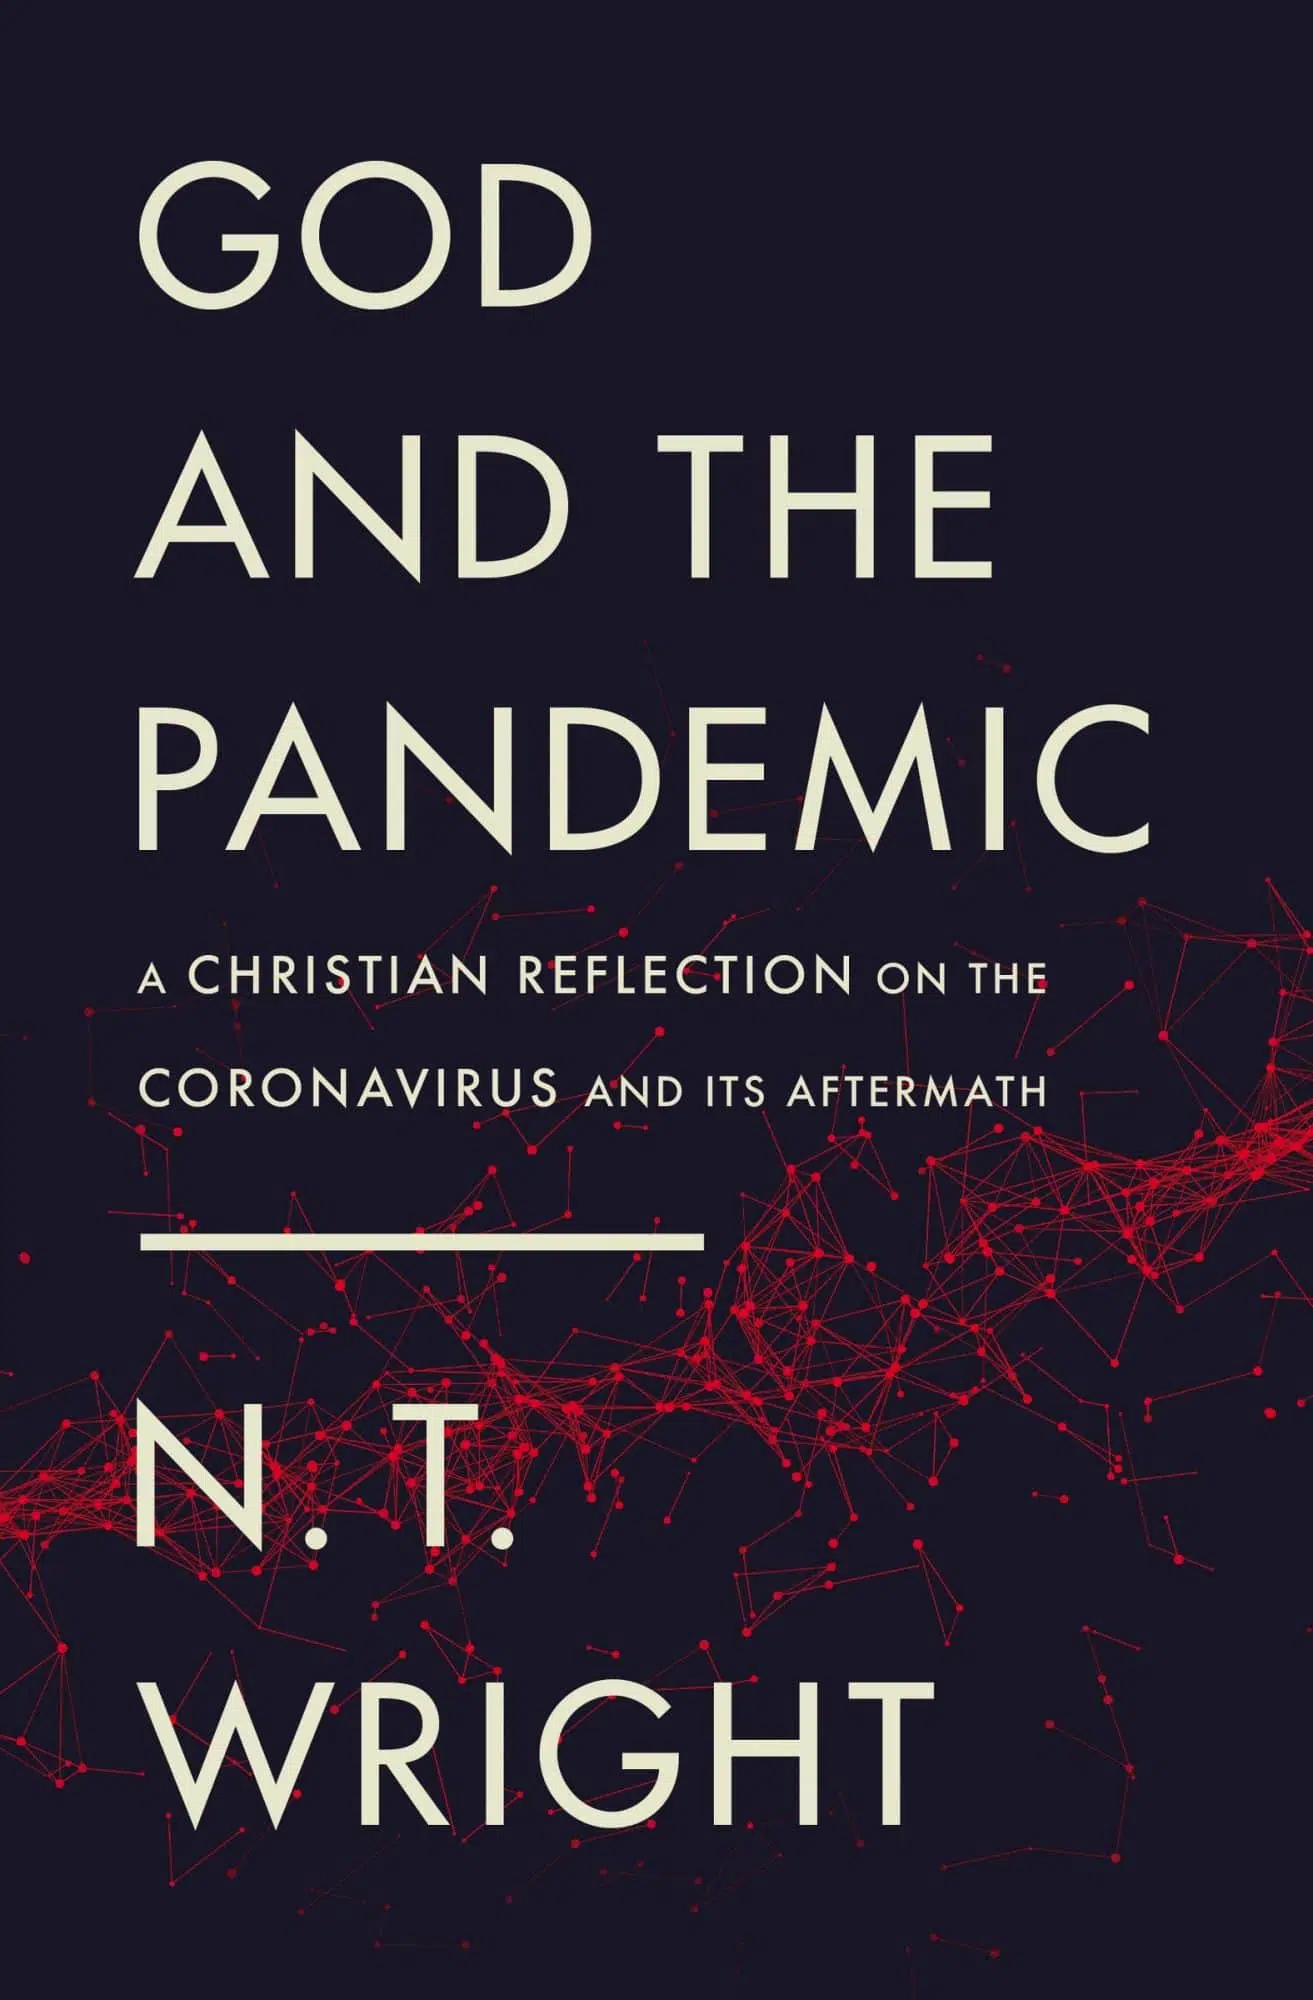 God And The Pandemic: A Christian Reflection on the Coronavirus